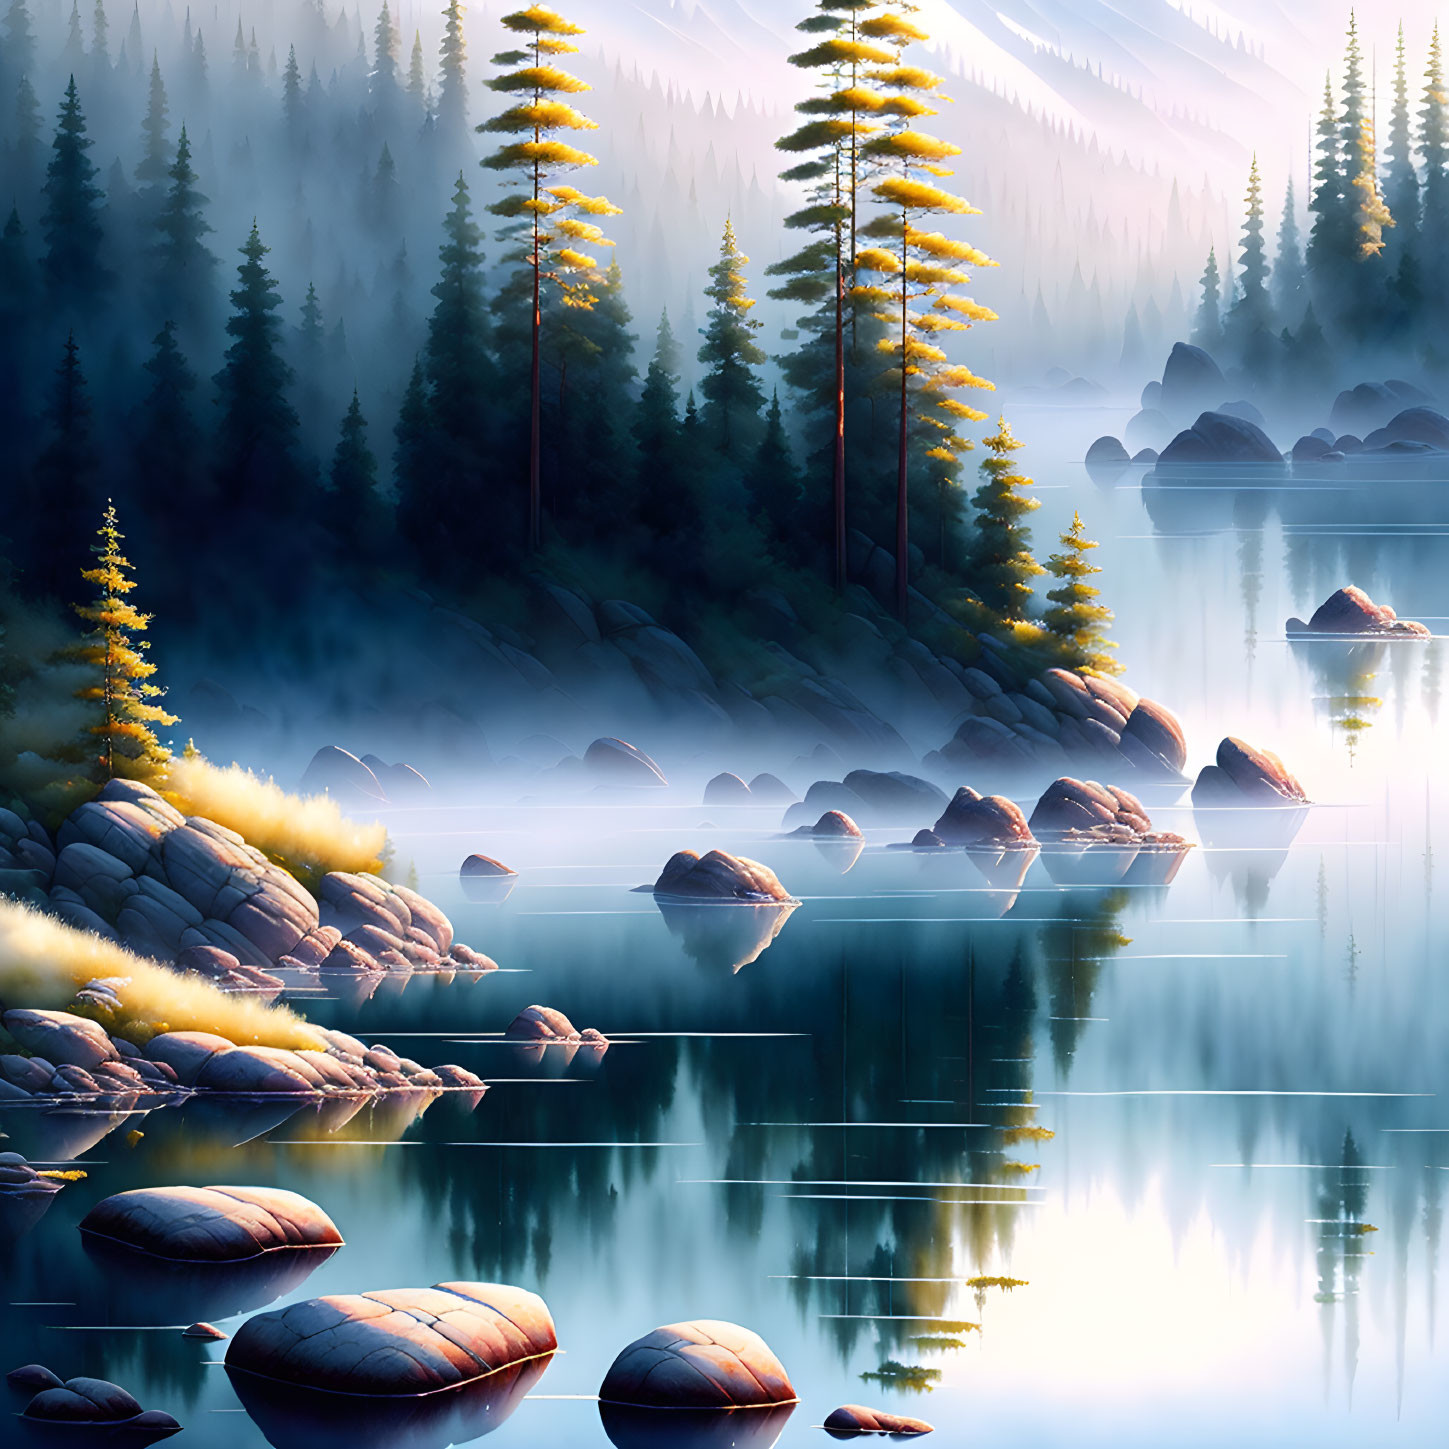 Serene lake at dawn/dusk with mist, forest, mountains, tall trees, and rocks reflected